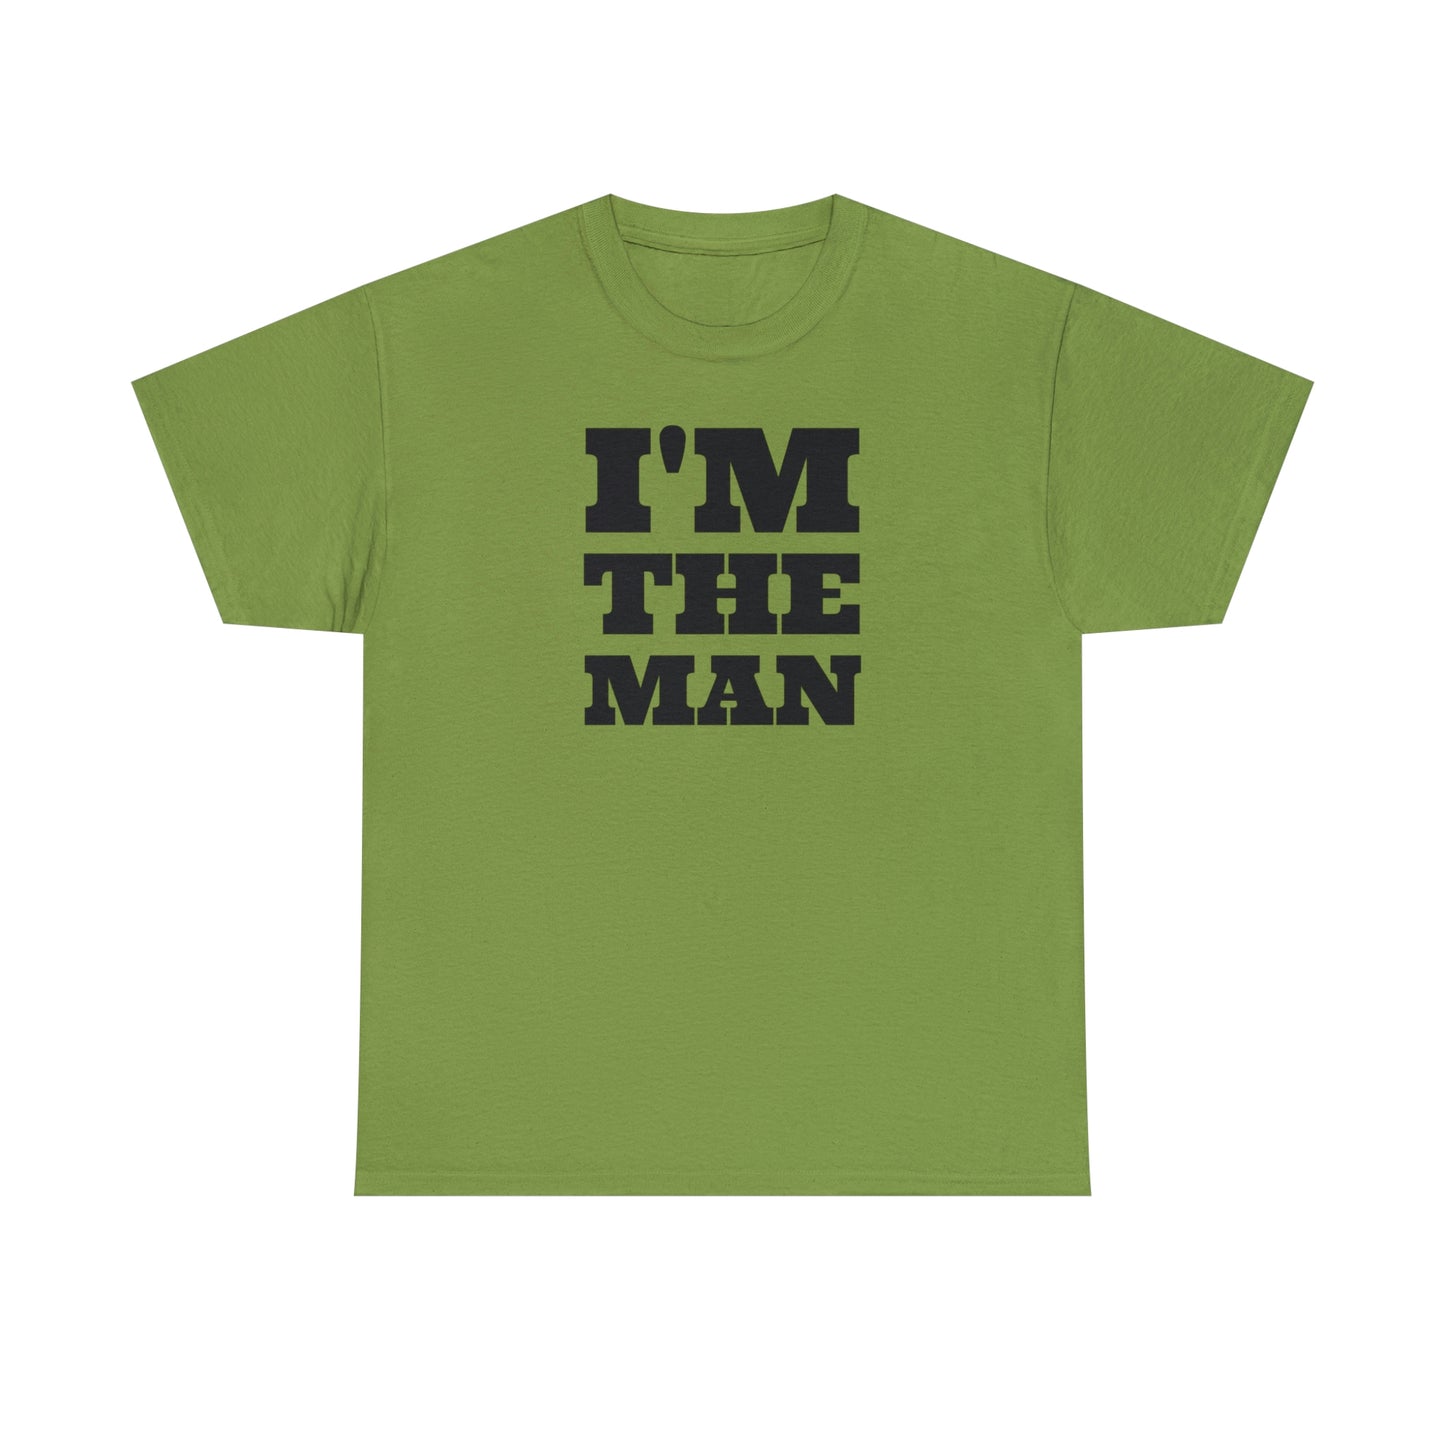 Dad T-Shirt For Father's Day T Shirt For Man TShirt For Macho Man Shirt For Birthday Gift For Guy Shirt For Masculine Gift Song Lyric Shirt